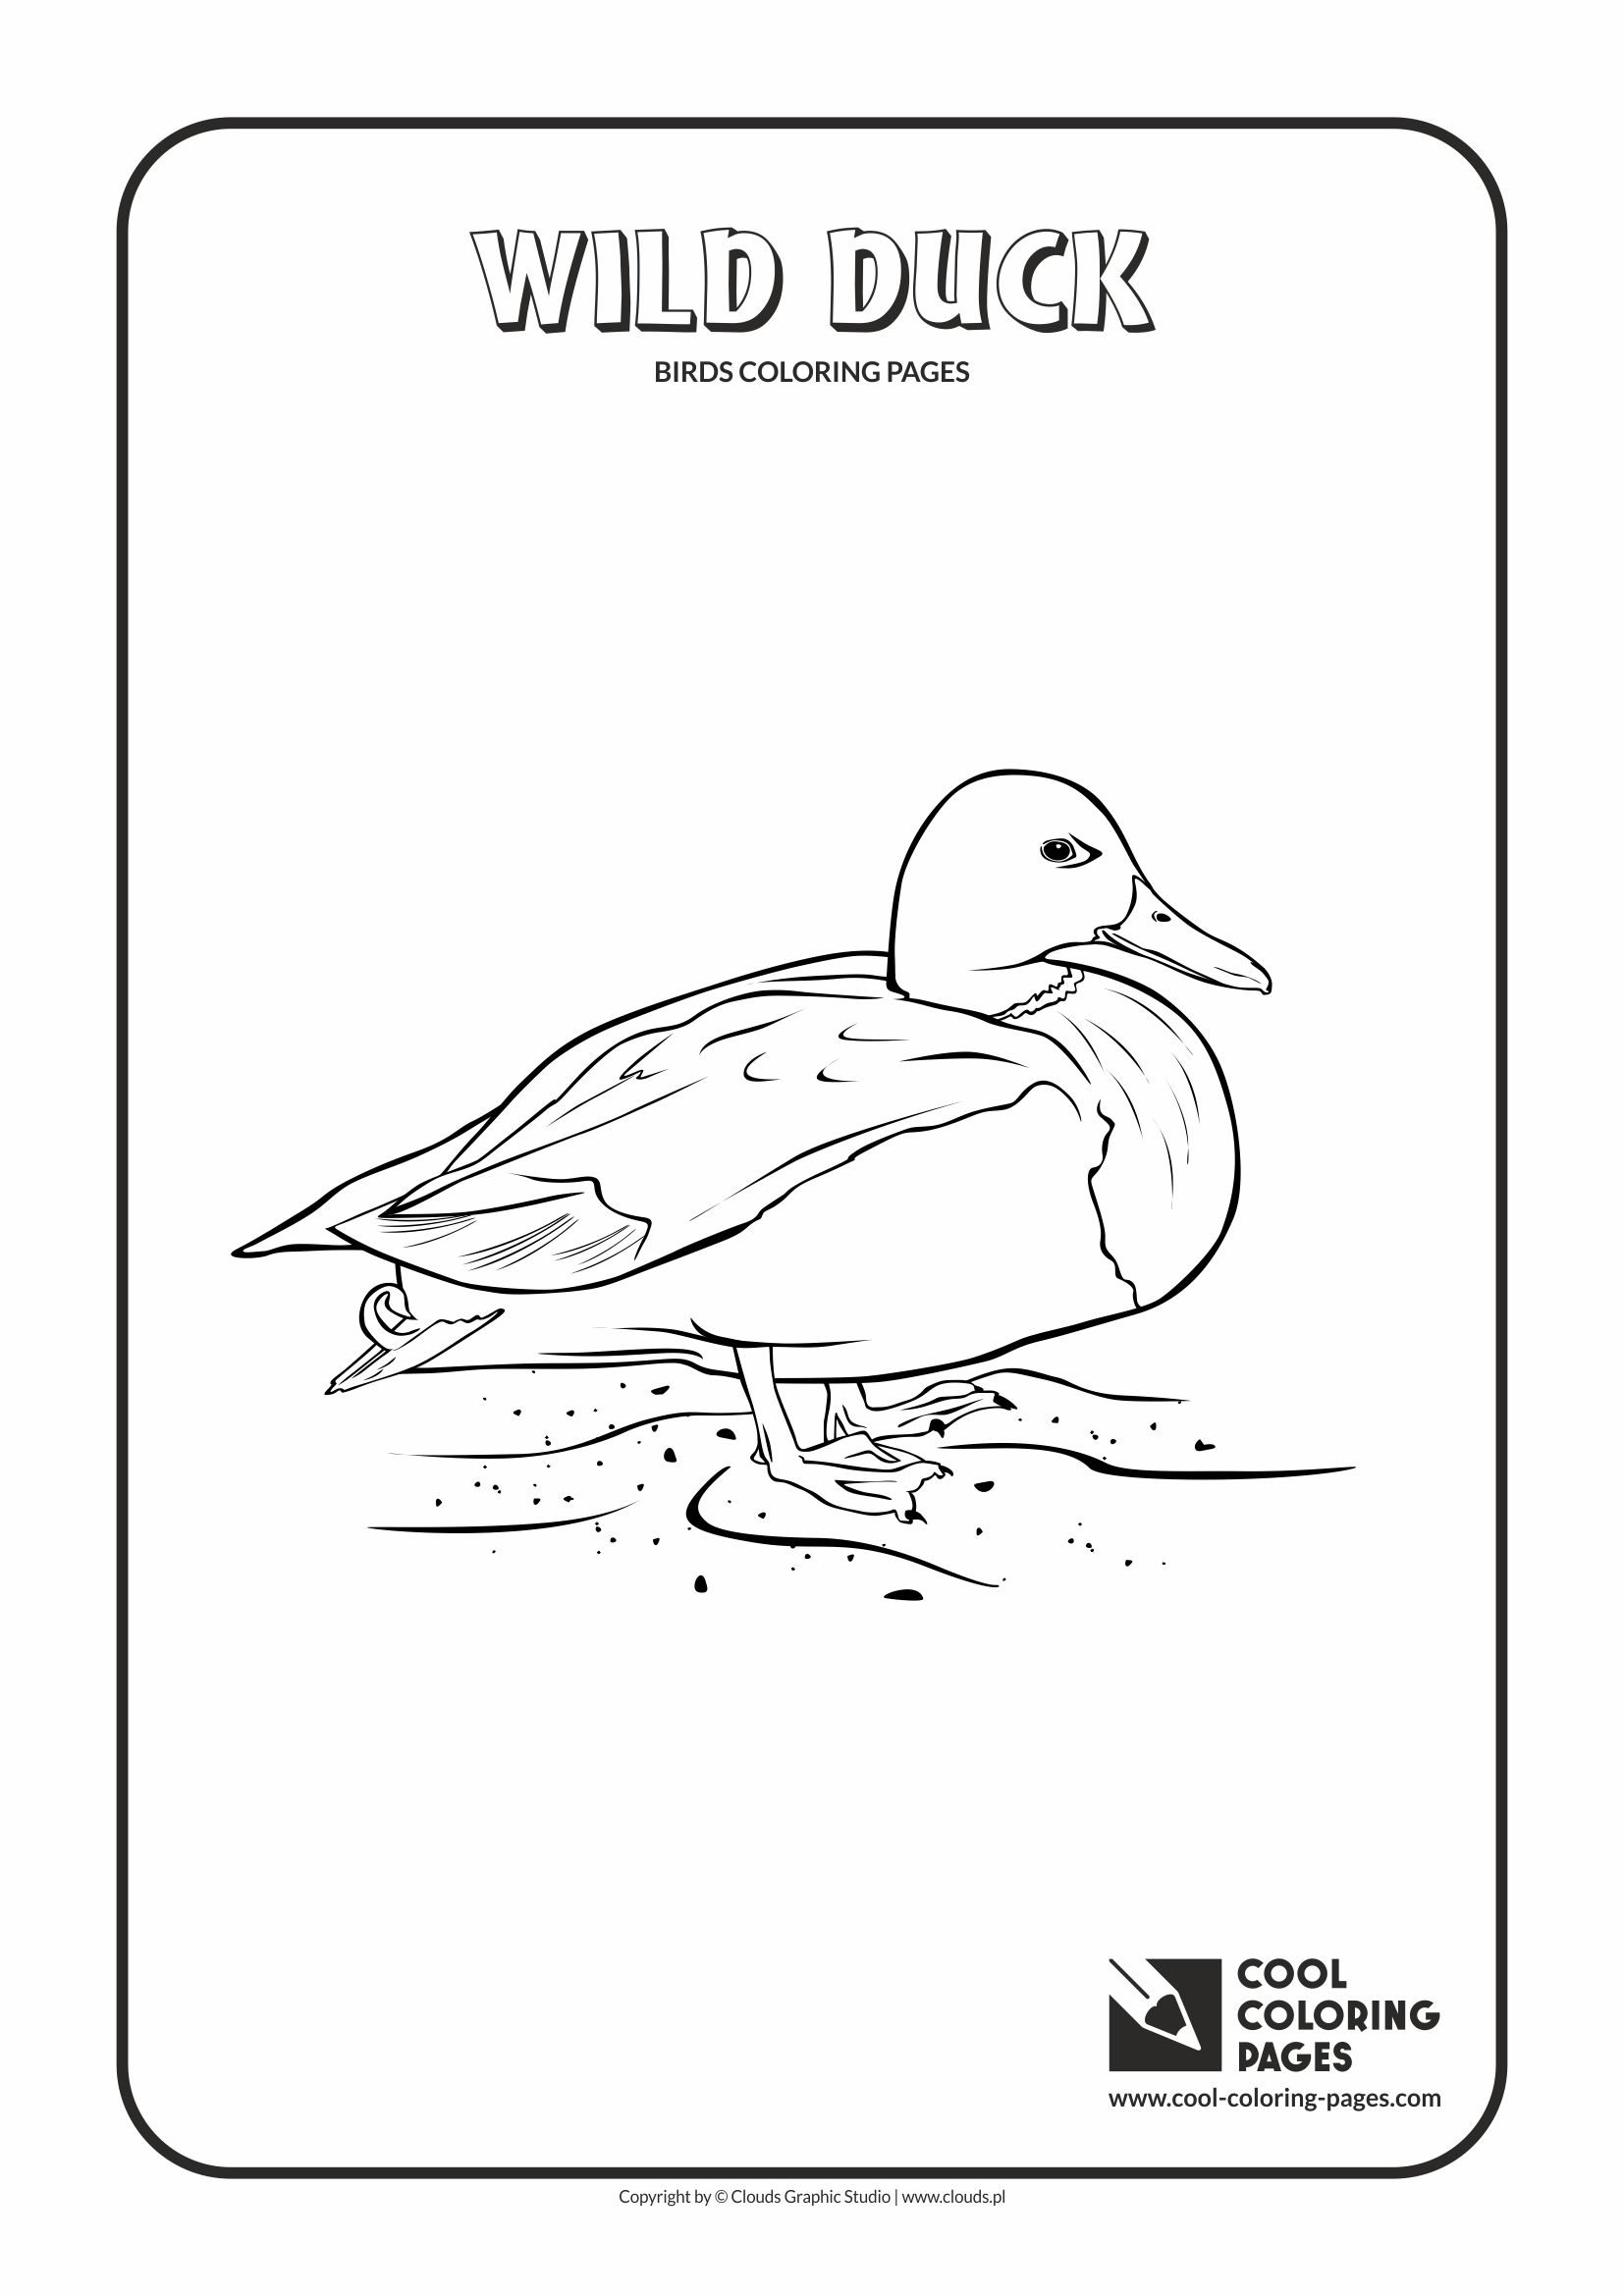 Cool Coloring Pages - Animals / Wild duck / Coloring page with wild duck